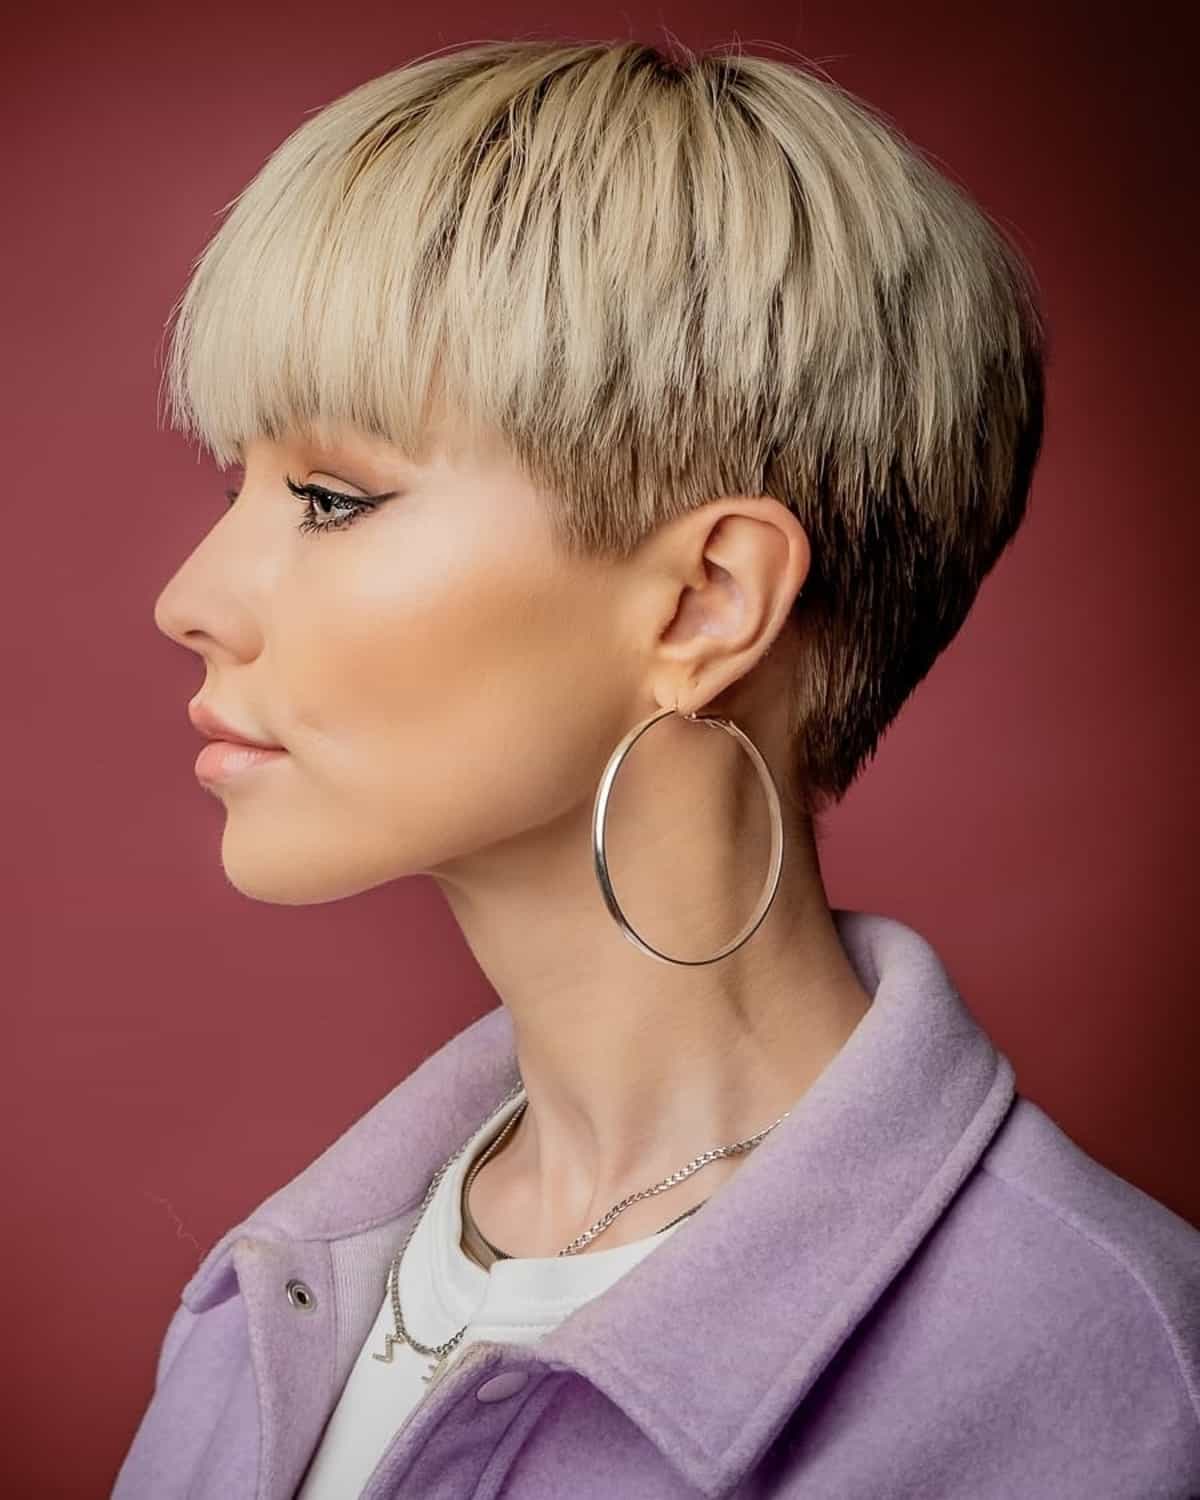 Textured pixie with bangs